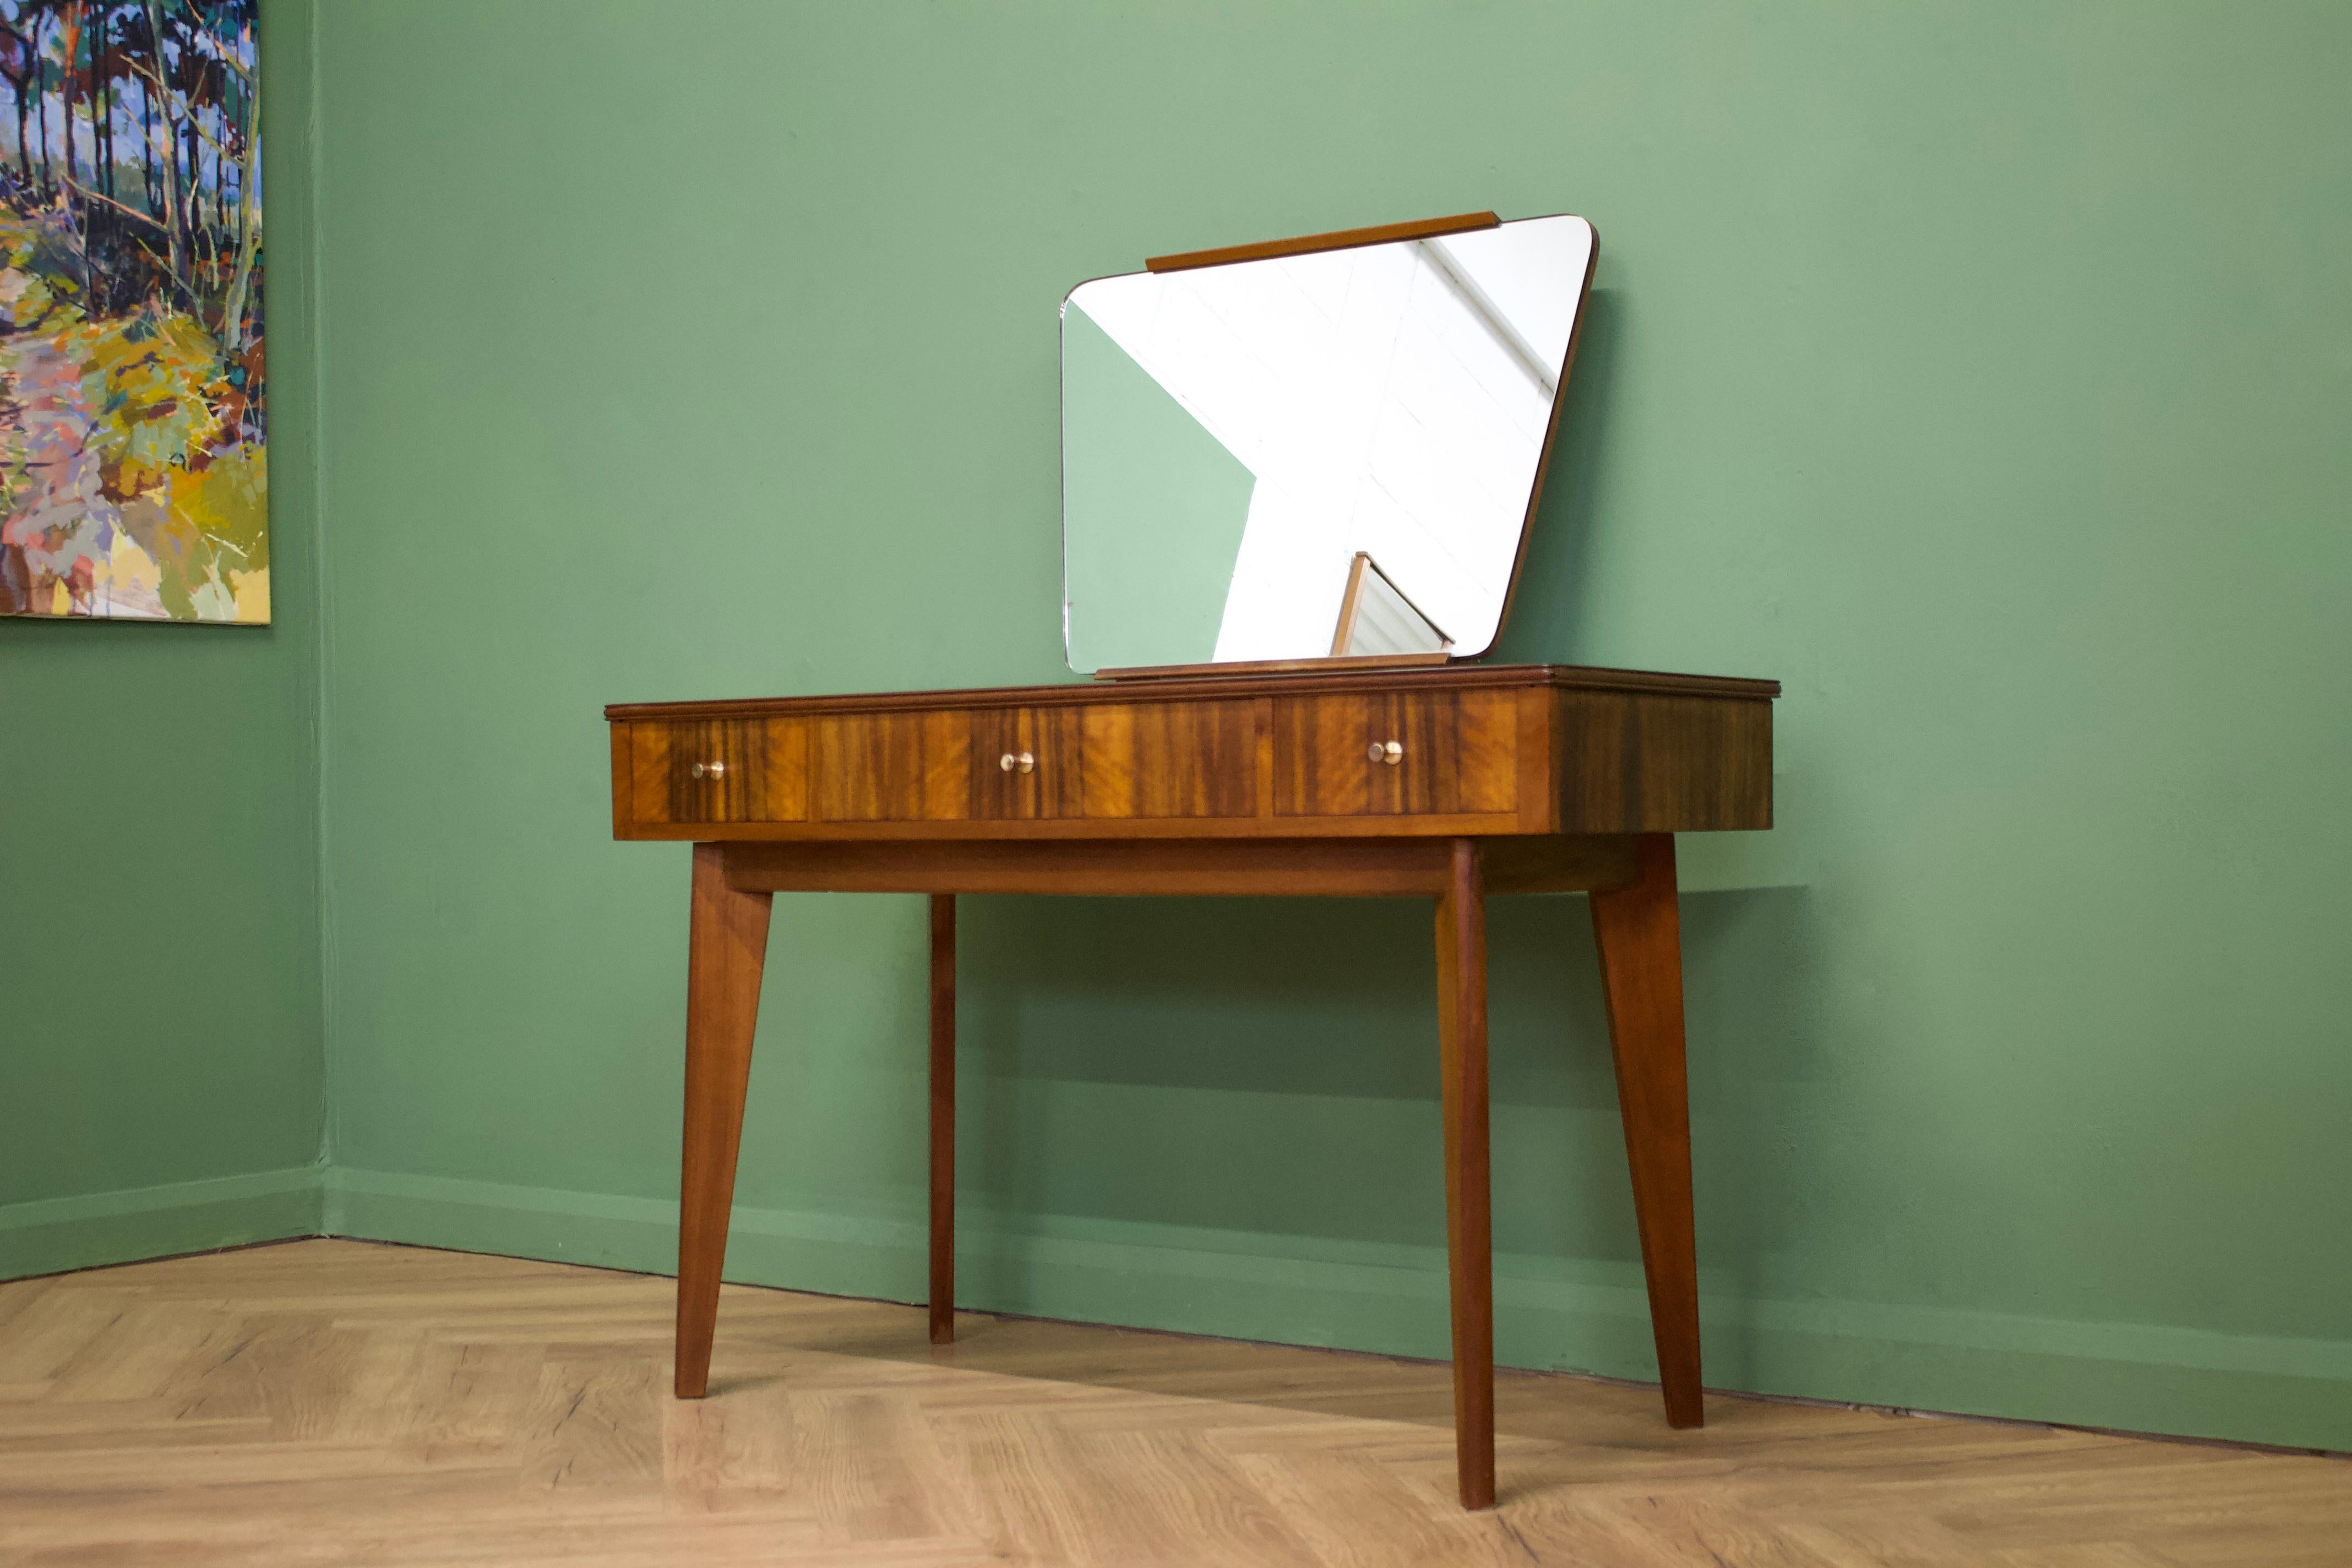 British Midcentury Dressing Table in Walnut from Morris of Glasgow, 1950s